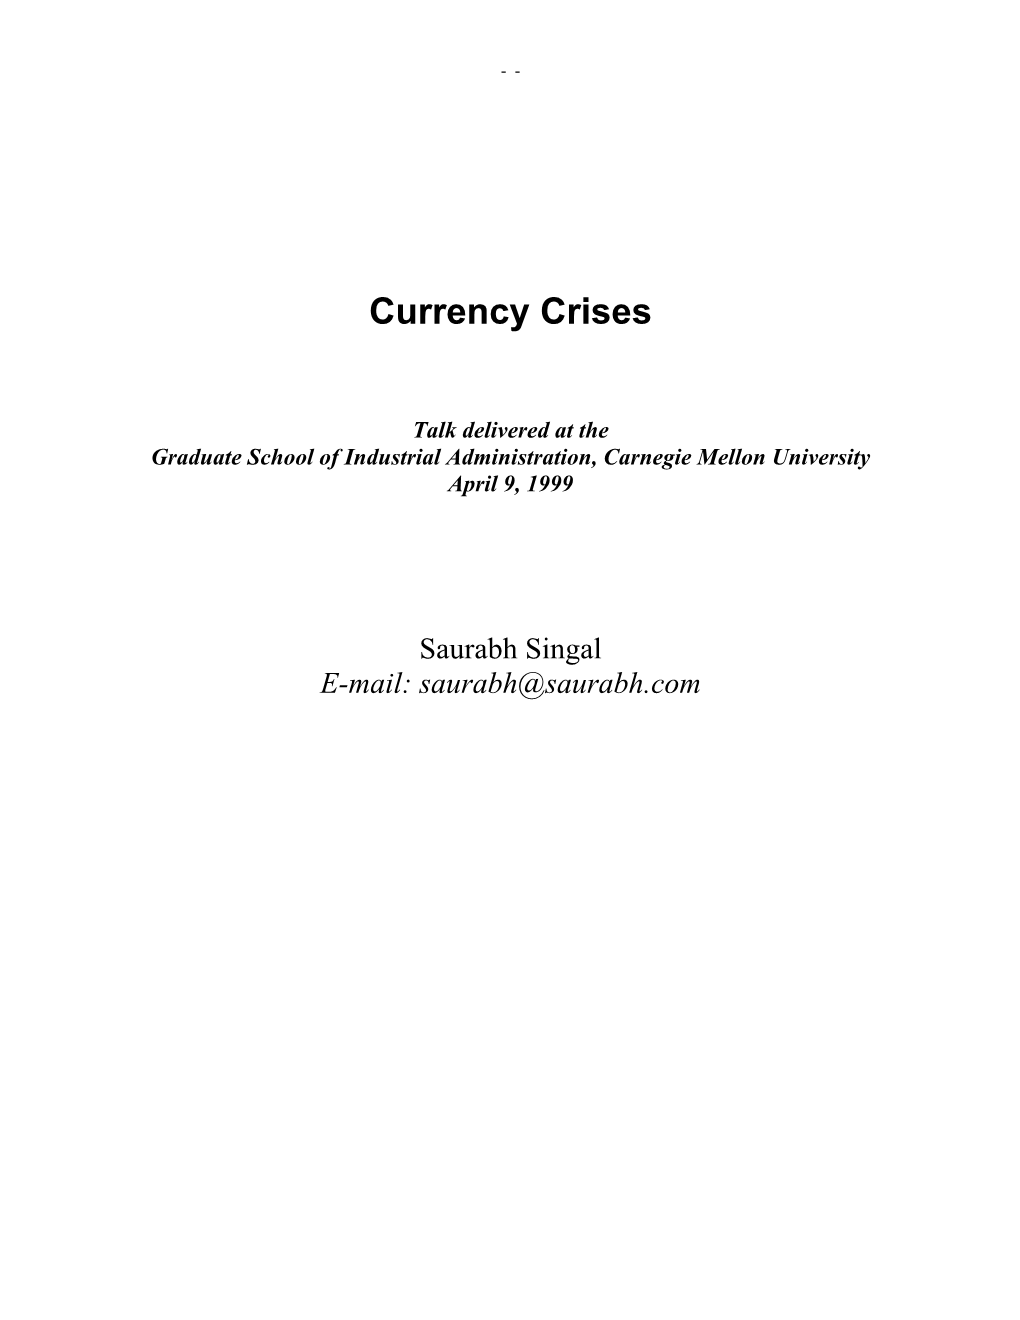 Currency Crisis